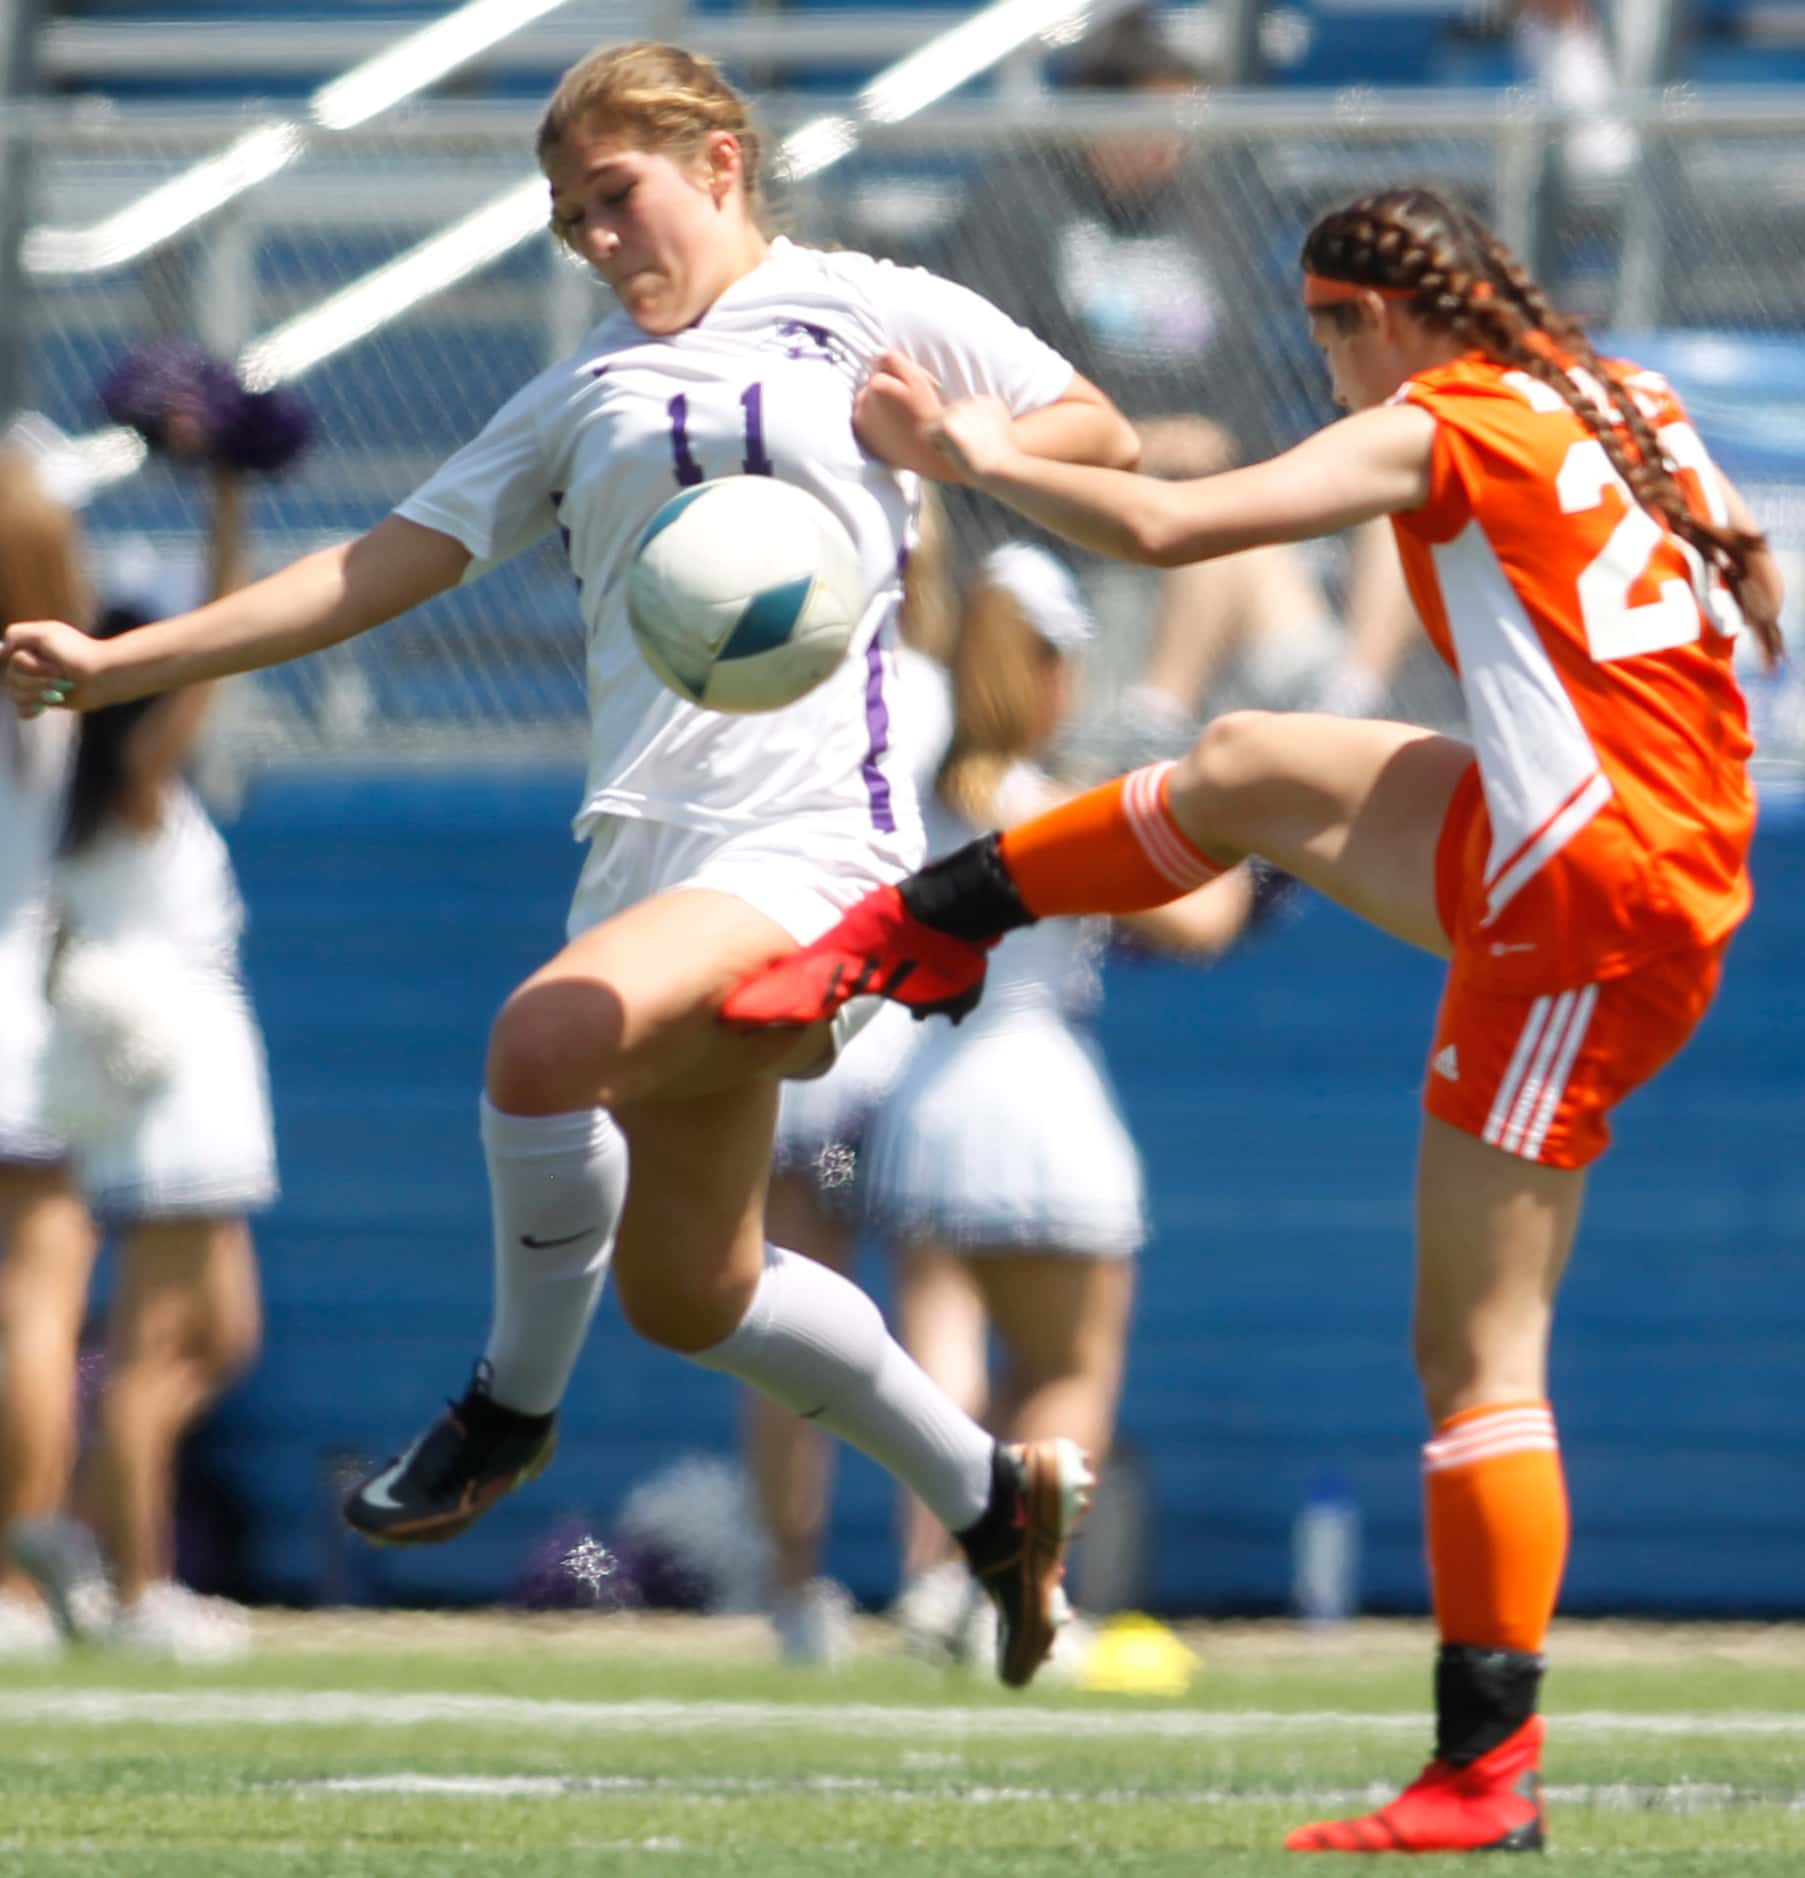 Celina's Ashton Lowry (20) clears a kick in front of Boerne's Samantha Ramirez (11) during...